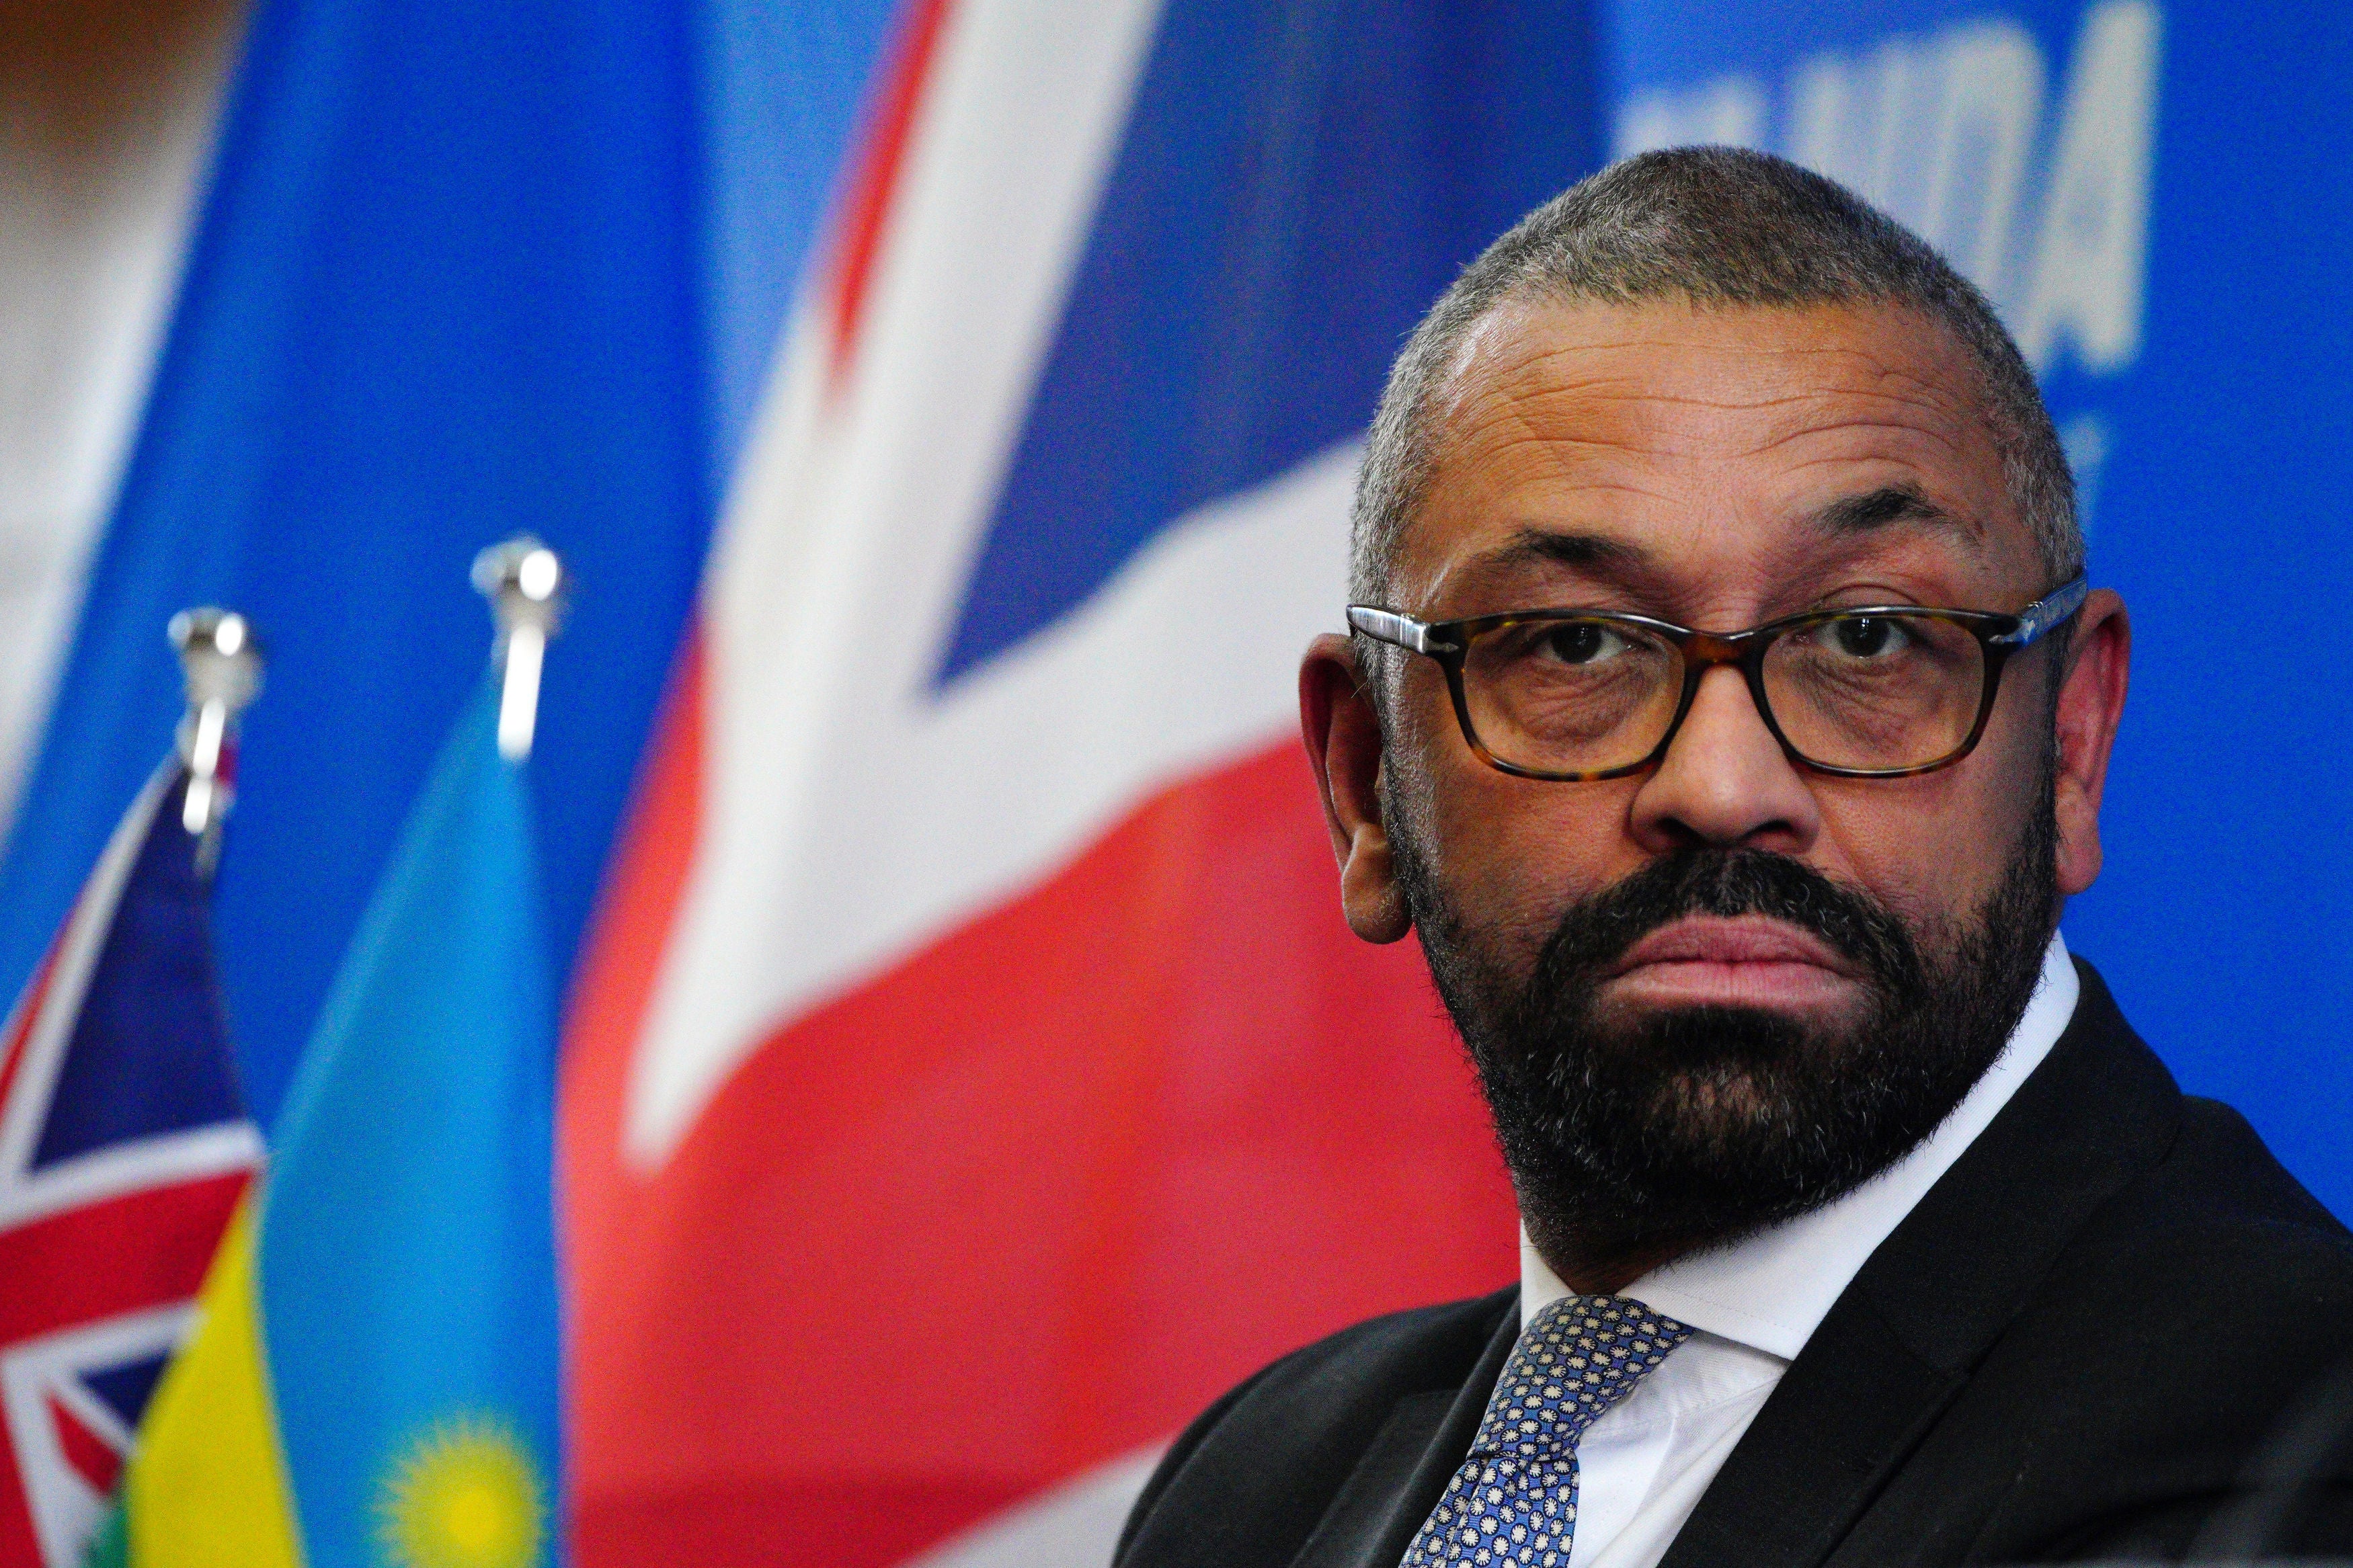 James Cleverly has flown to Rwanda to try and salvage the plan